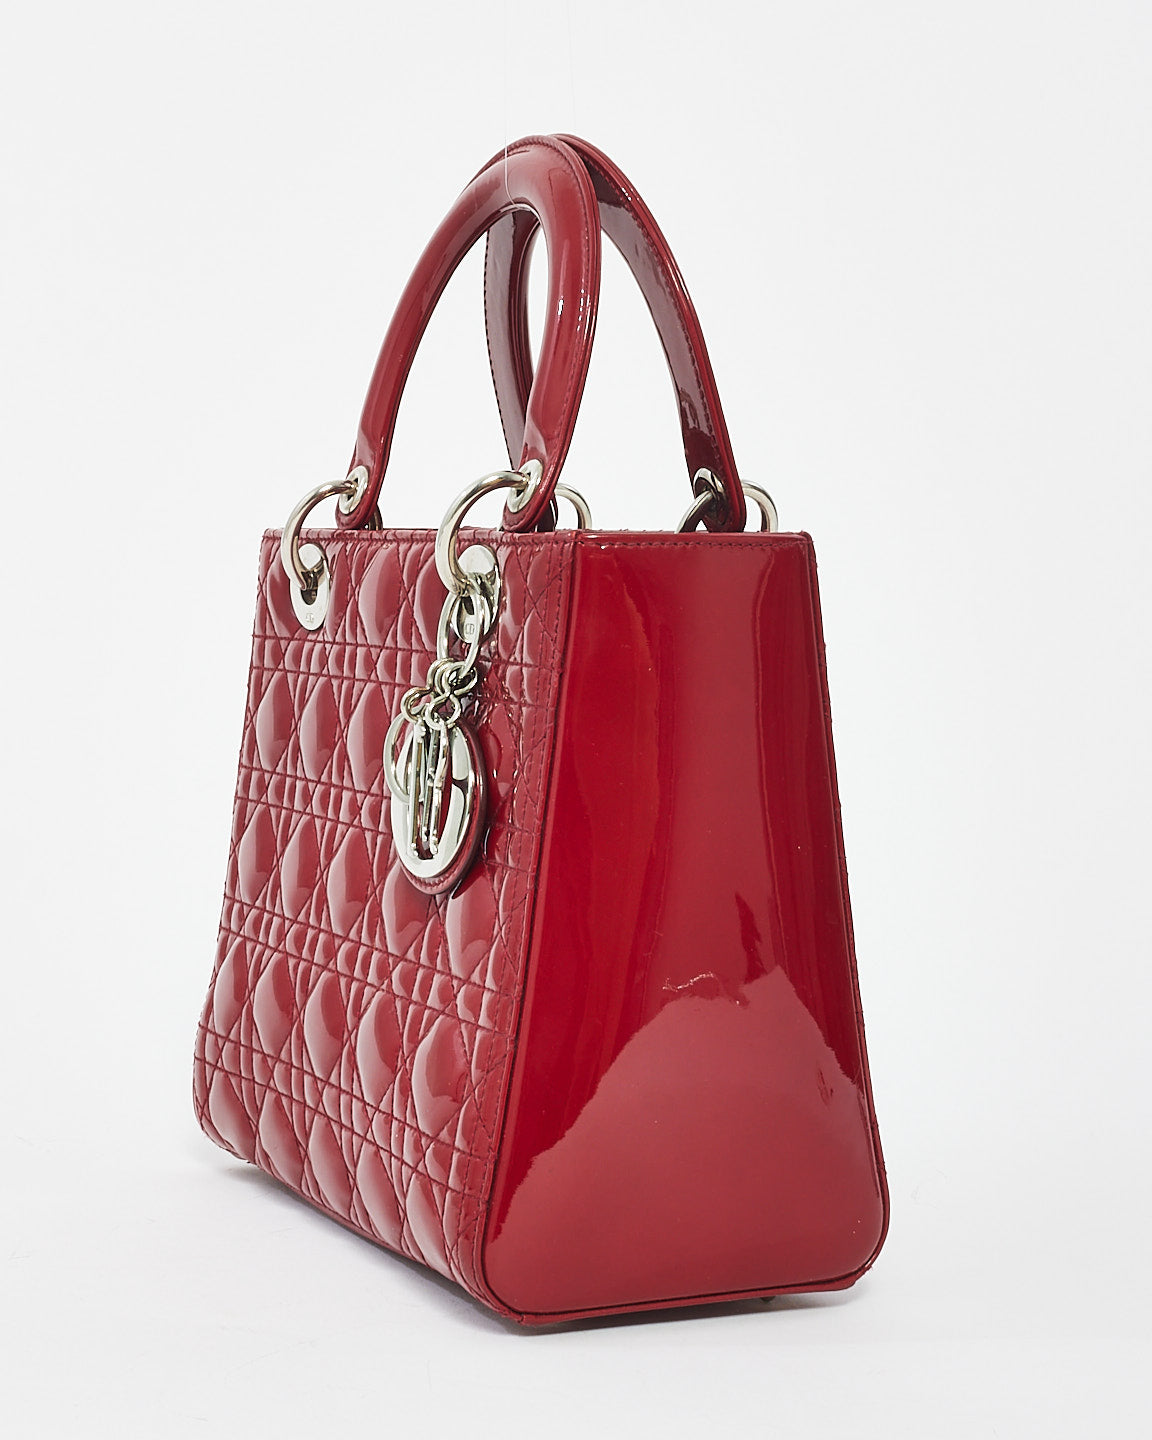 Dior Red Patent Leather Medium Lady Dior with SHW